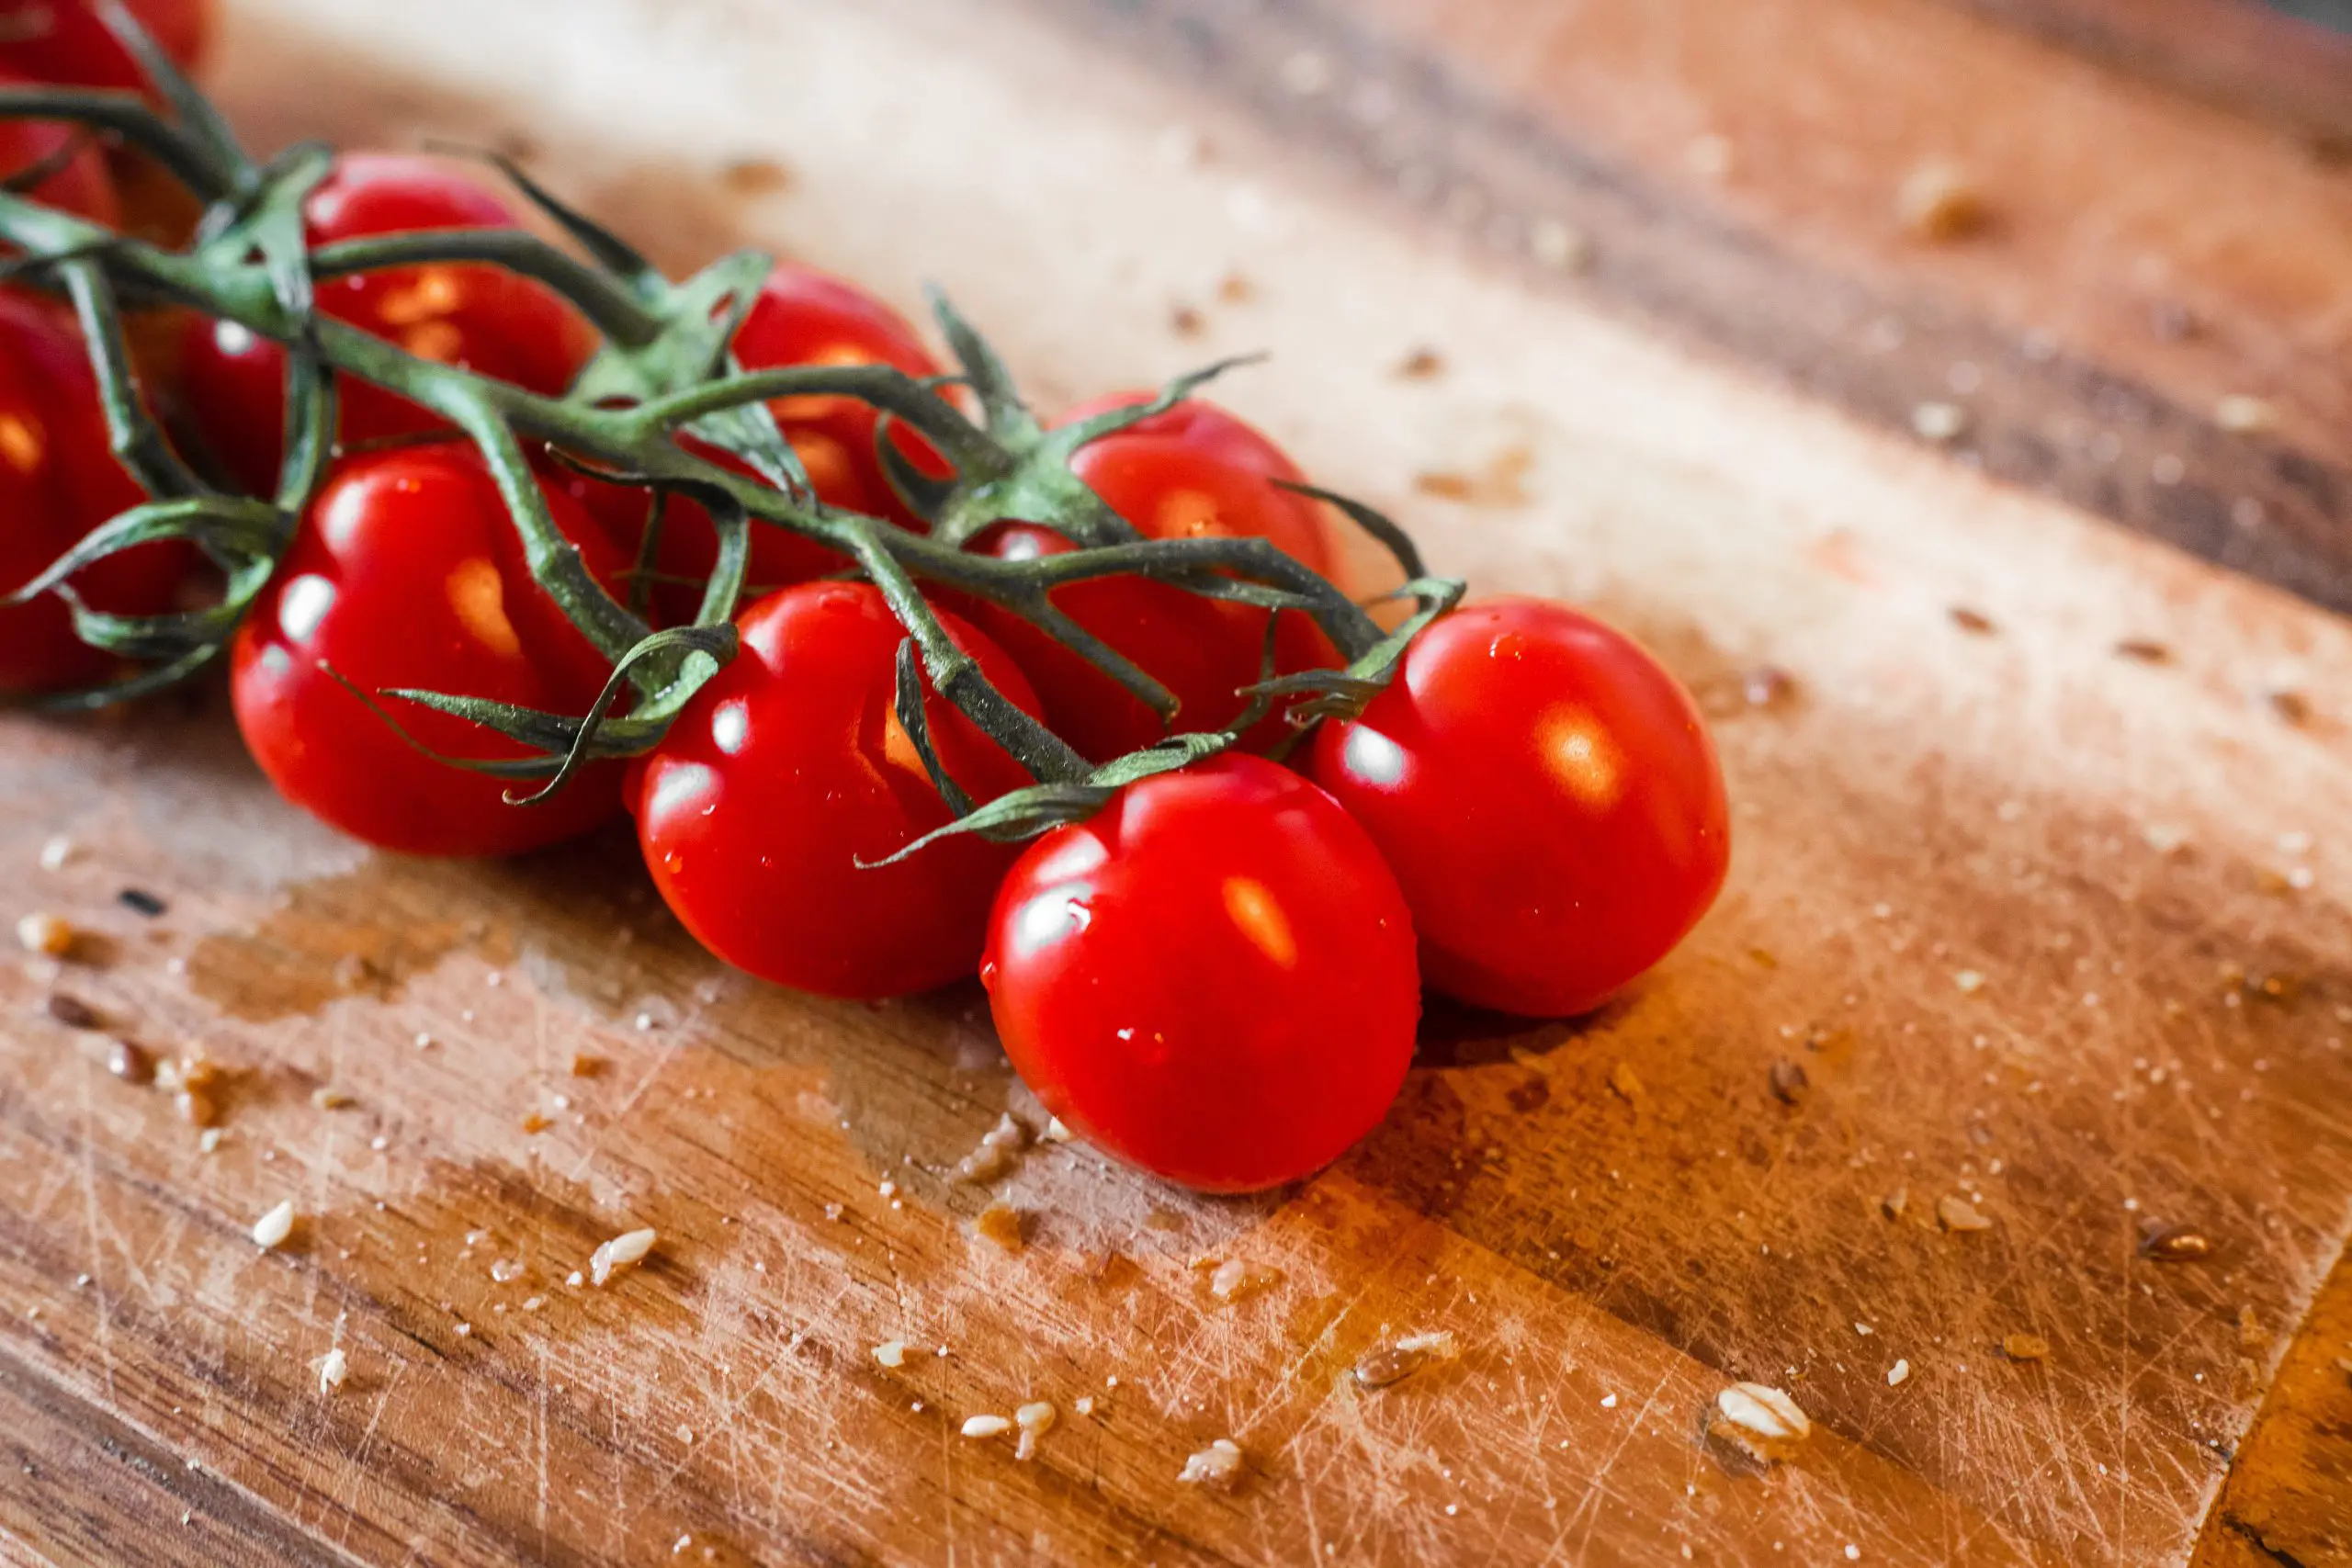 How to Freeze Cherry Tomatoes